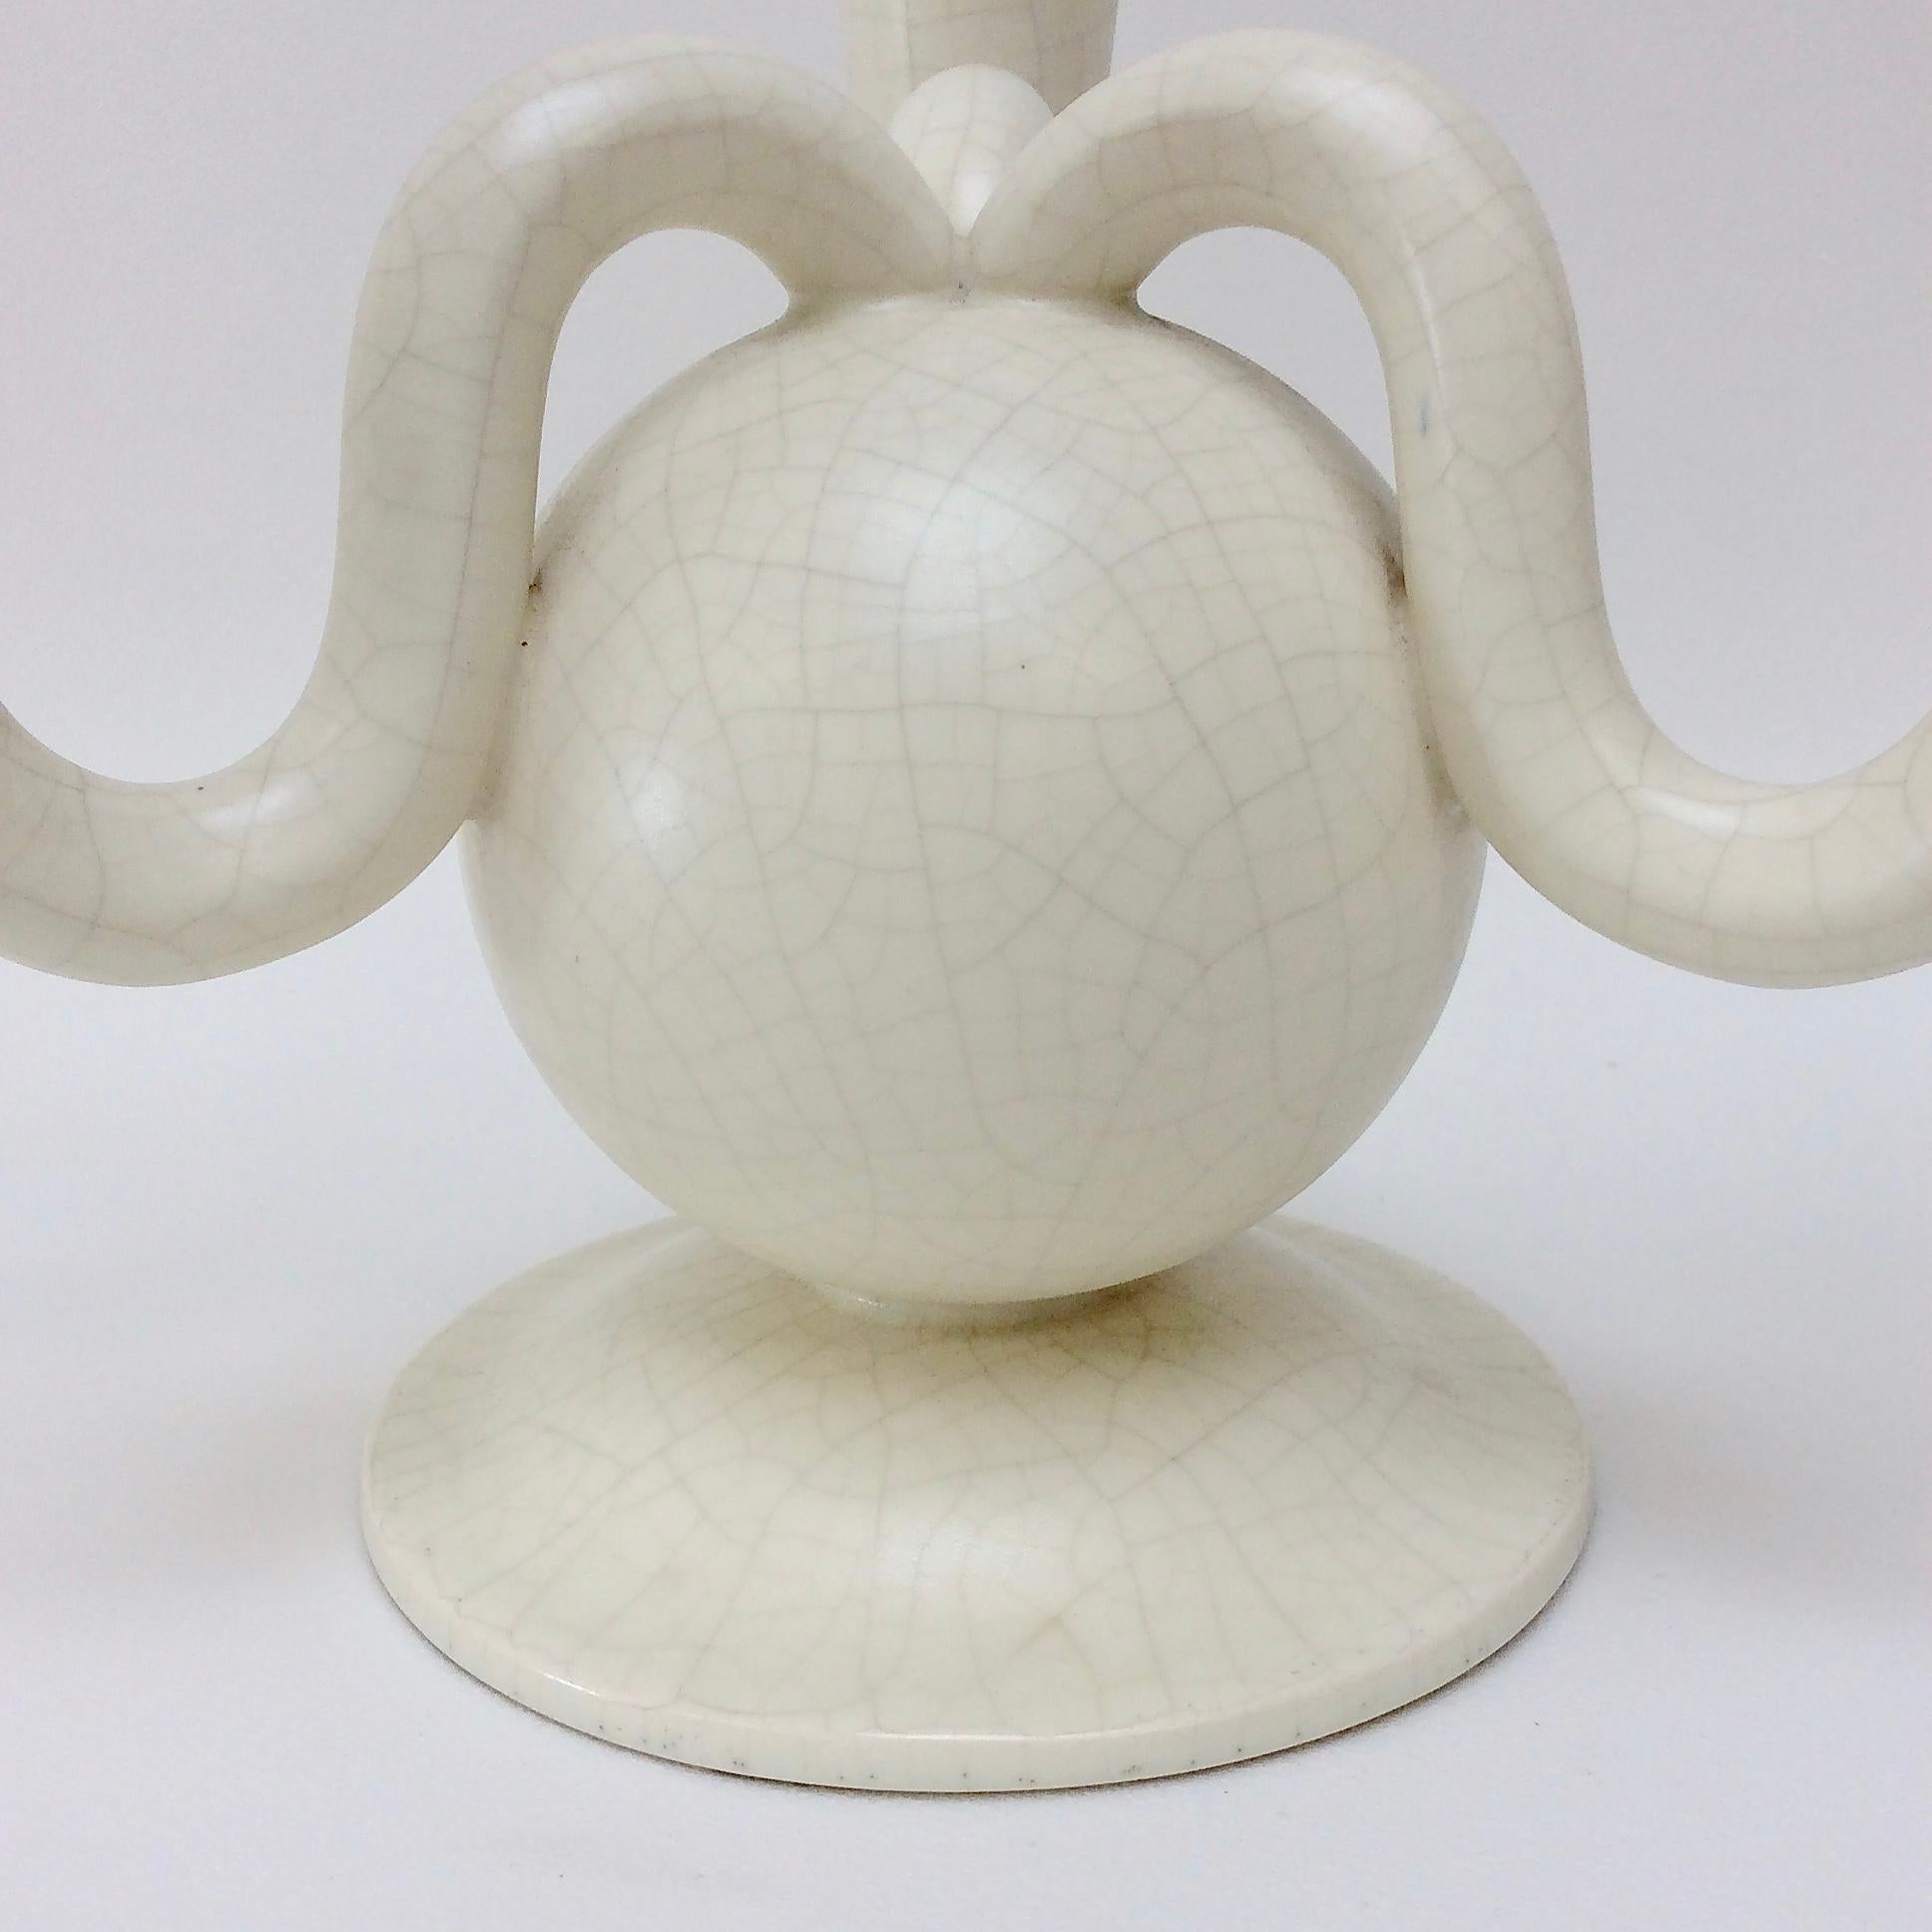 Nice Art Deco 3-arm candelabrum, circa 1930, France.
White crackled earthenware.
Dimensions: 21 cm height, 30 cm diameter.
Good condition.
All purchases are covered by our Buyer Protection Guarantee.
This item can be returned within 14 days of